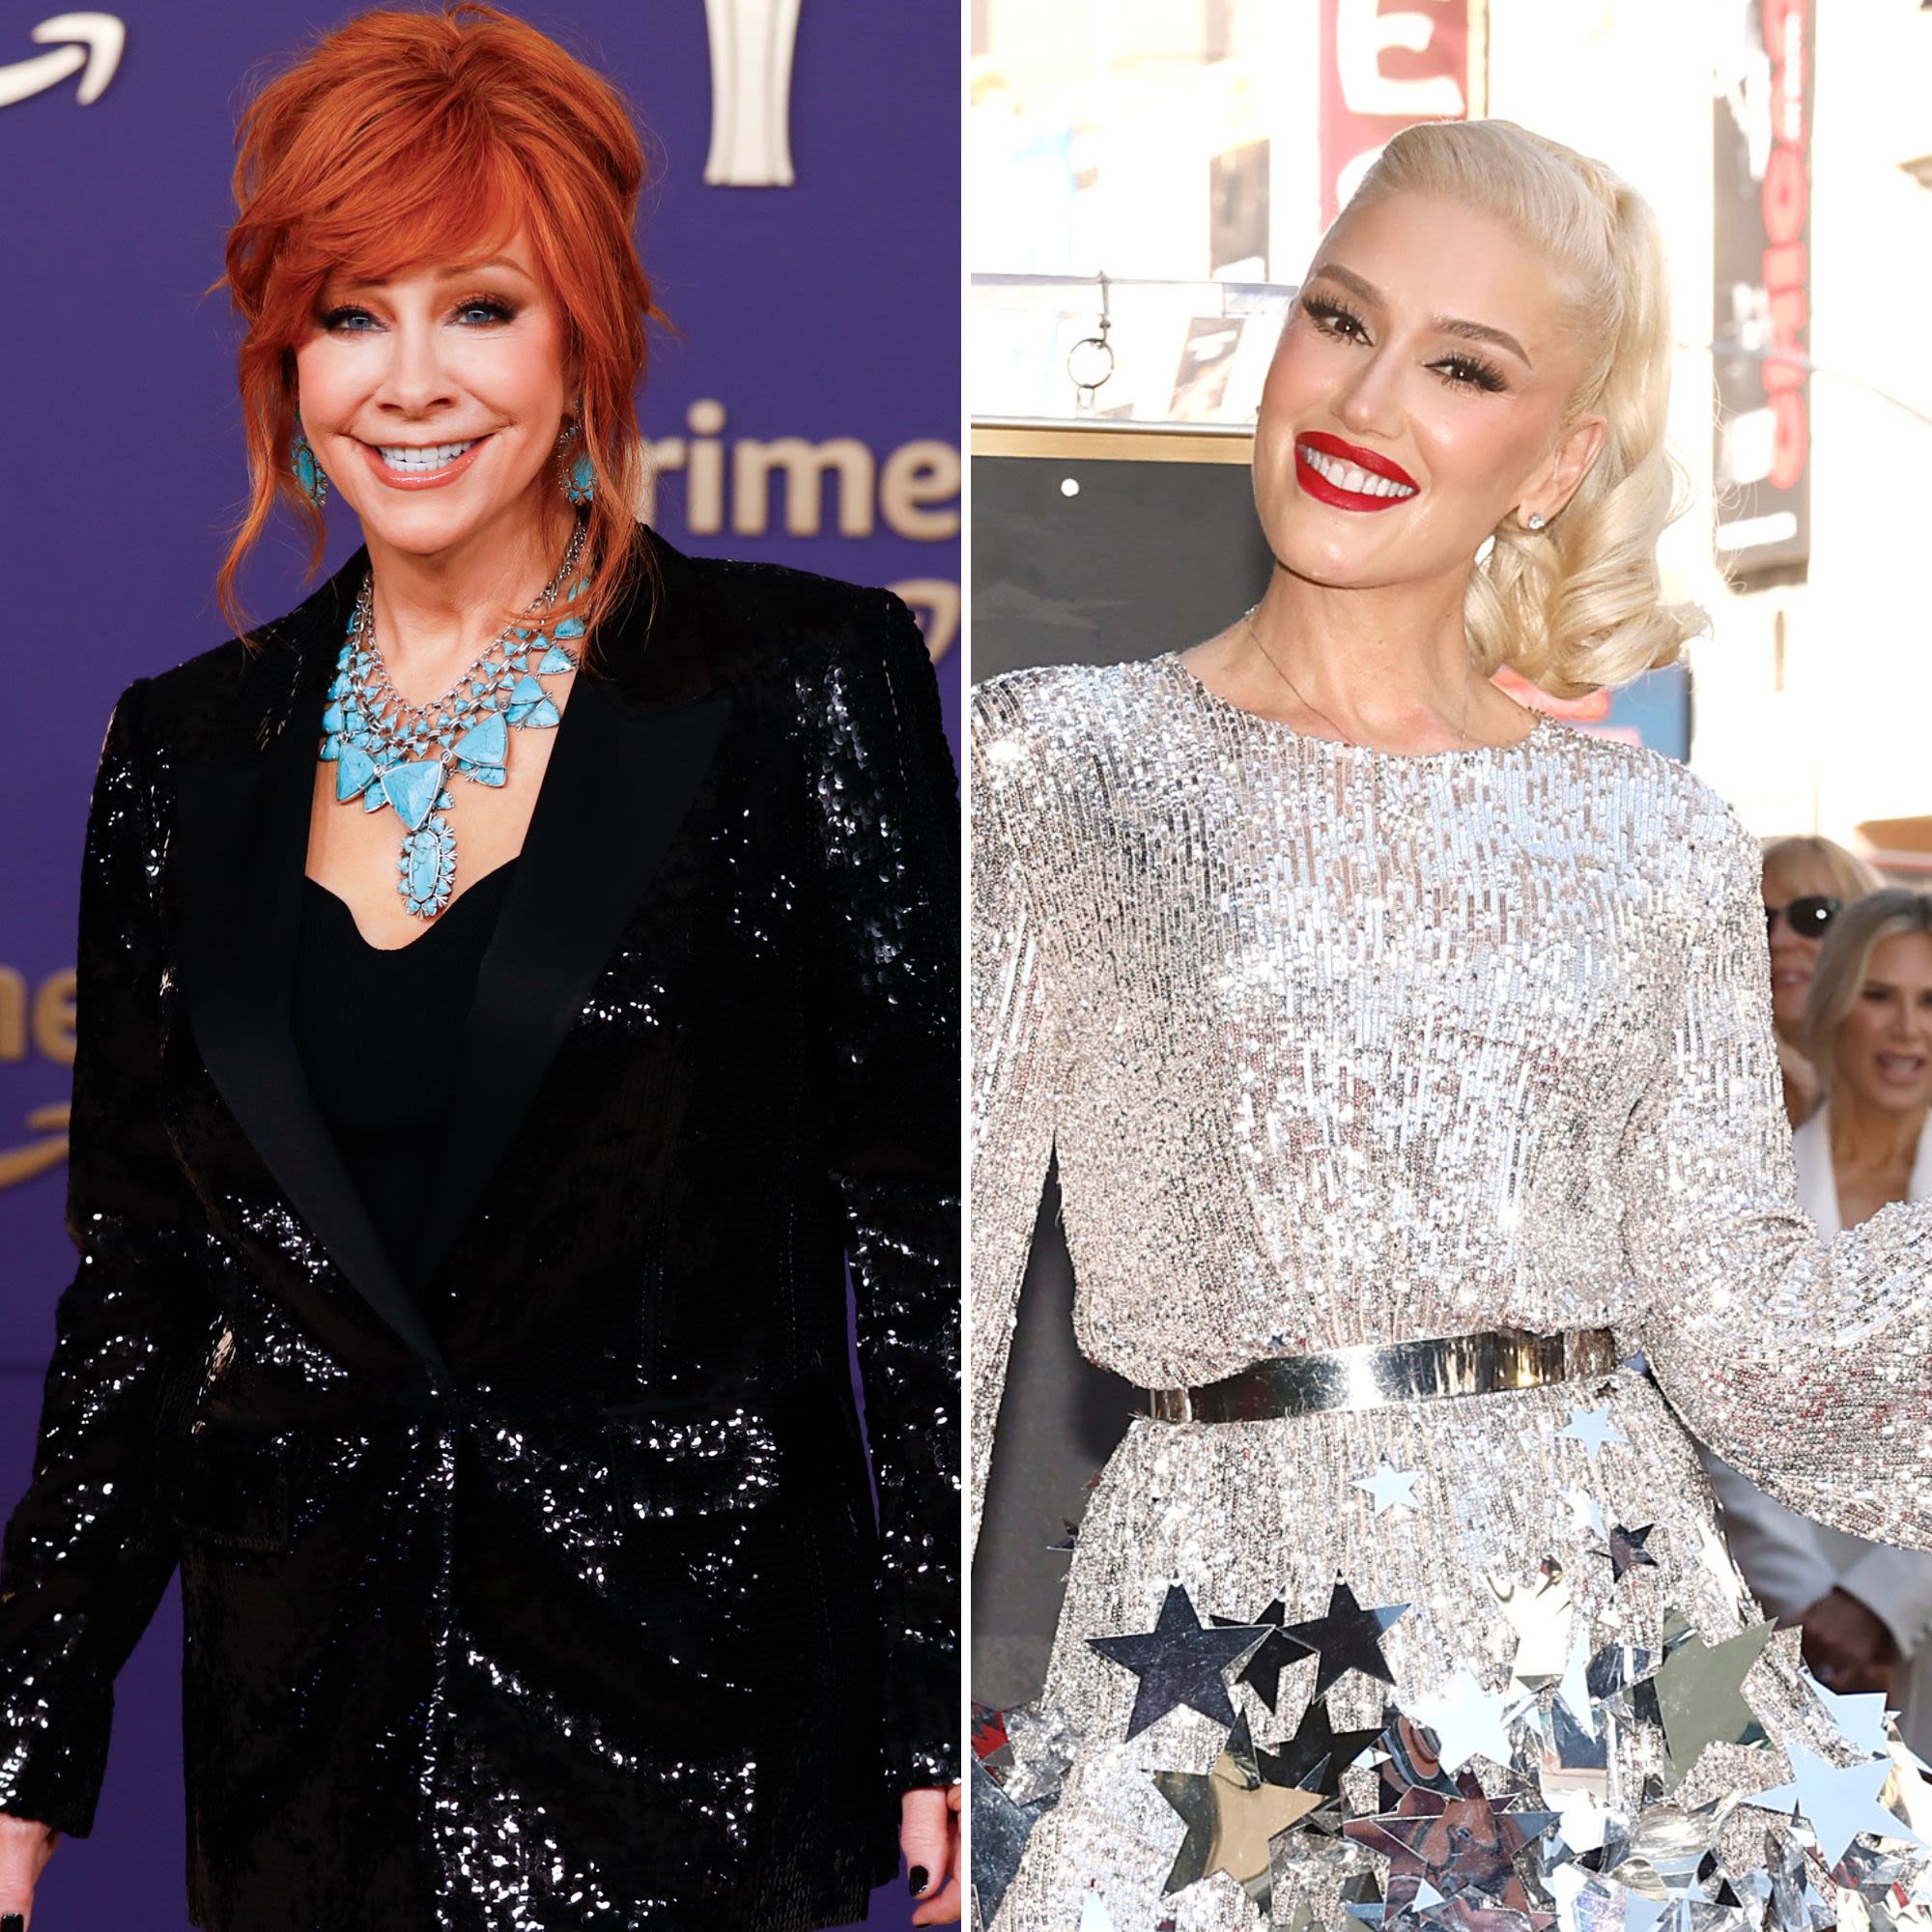 Reba McEntire Will Let Gwen Stefani Know ‘She’s in Charge’ During Season 26 of ‘The Voice’